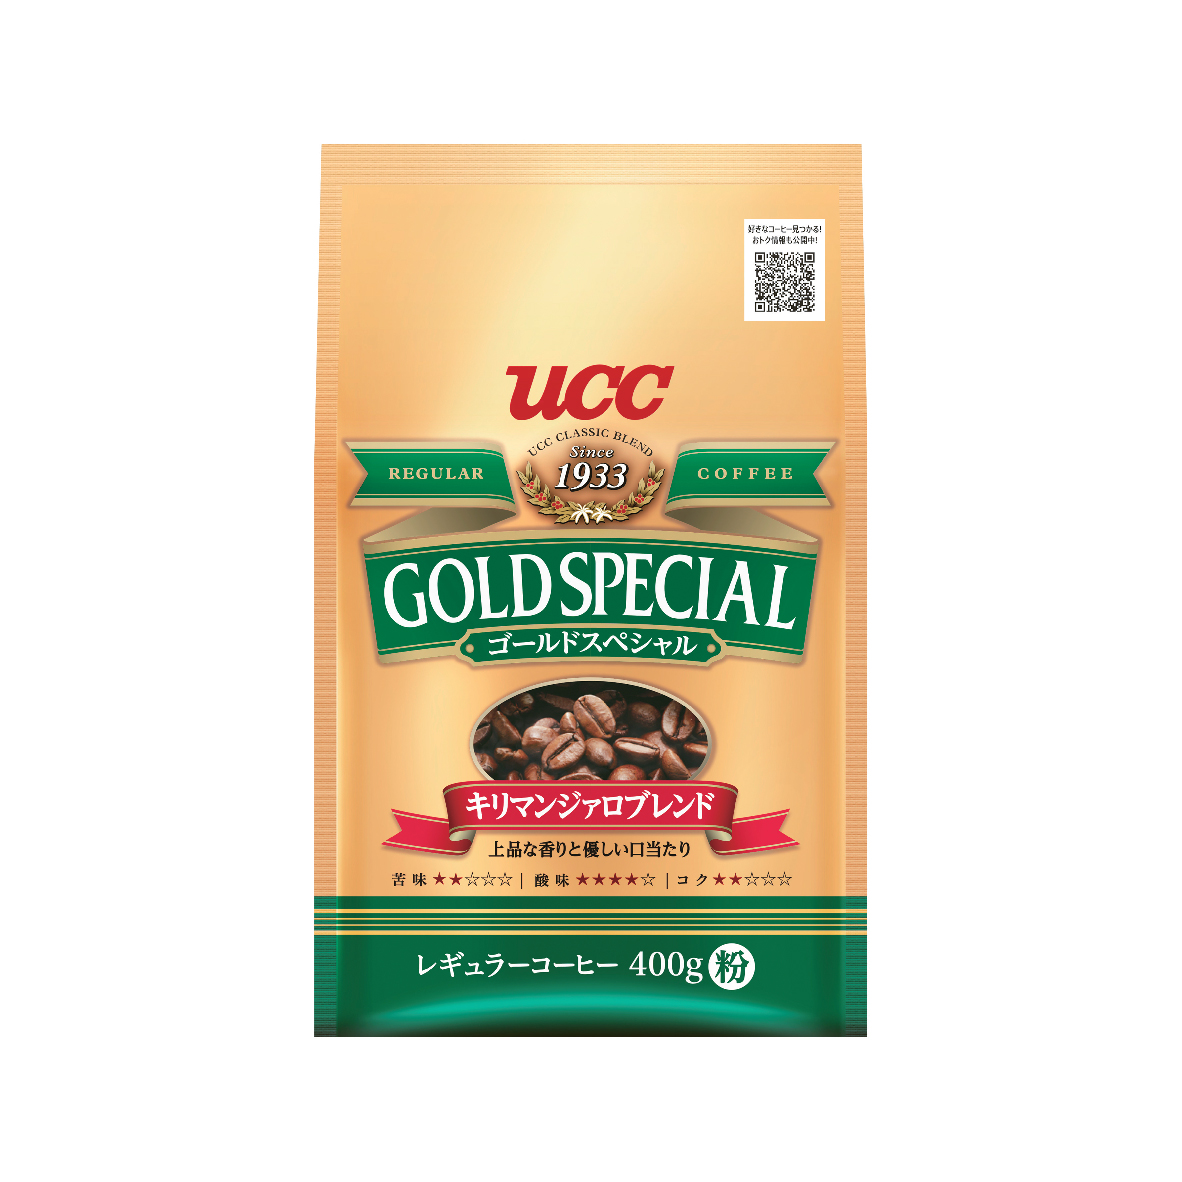 UCC Gold Special Kilimanjaro Blend Roasted Coffee